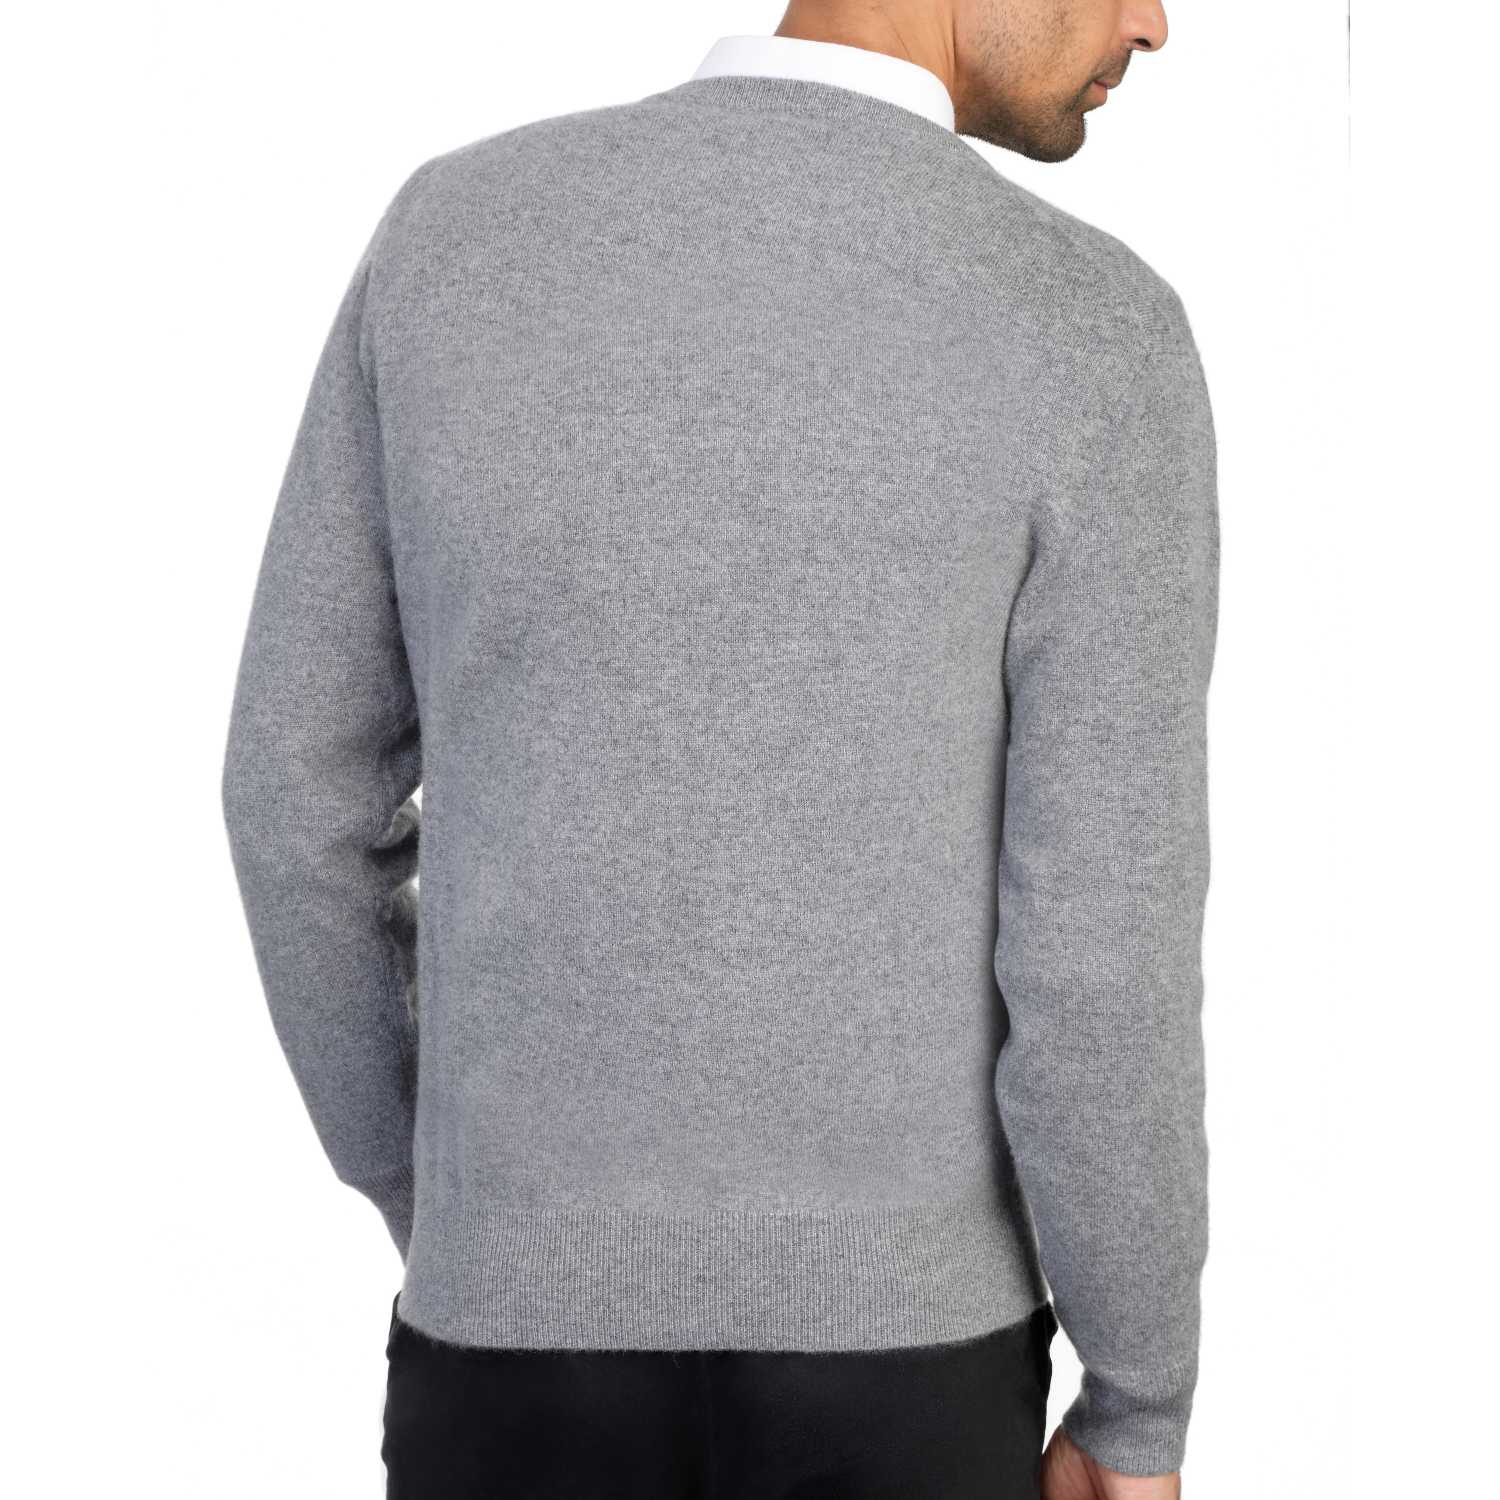 Mens Grey Cashmere Round Neck Sweater | Back | Shop at The Cashmere Choice | London